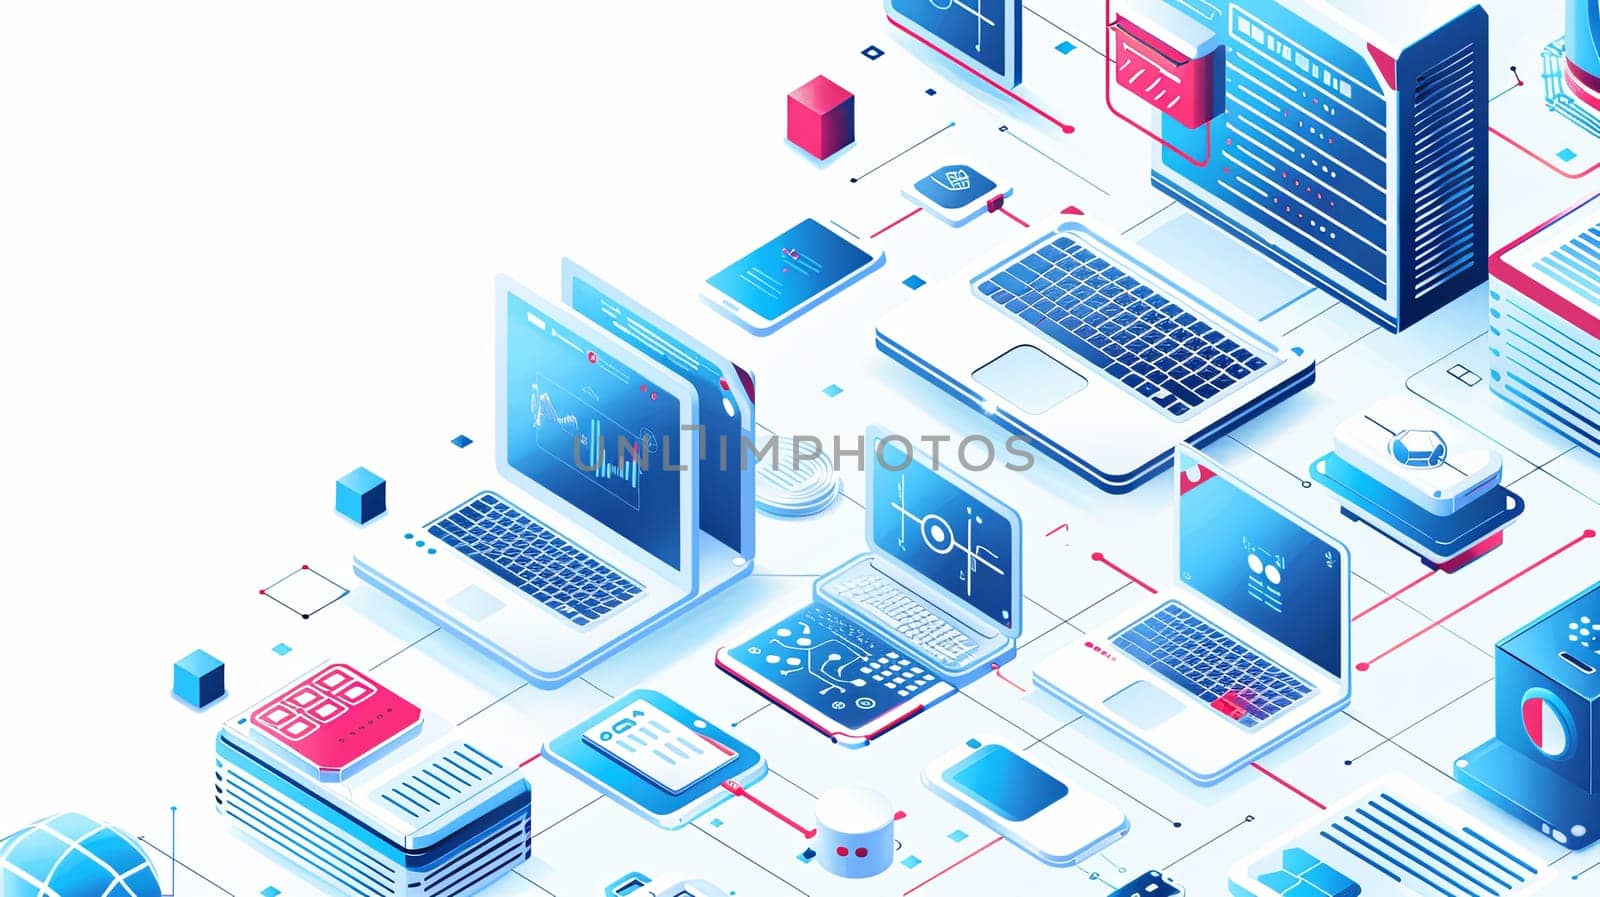 Various electronic devices such as computers, laptops, and liaisons arranged on a white background with copy space. Isometric icon design in white and blue colors.